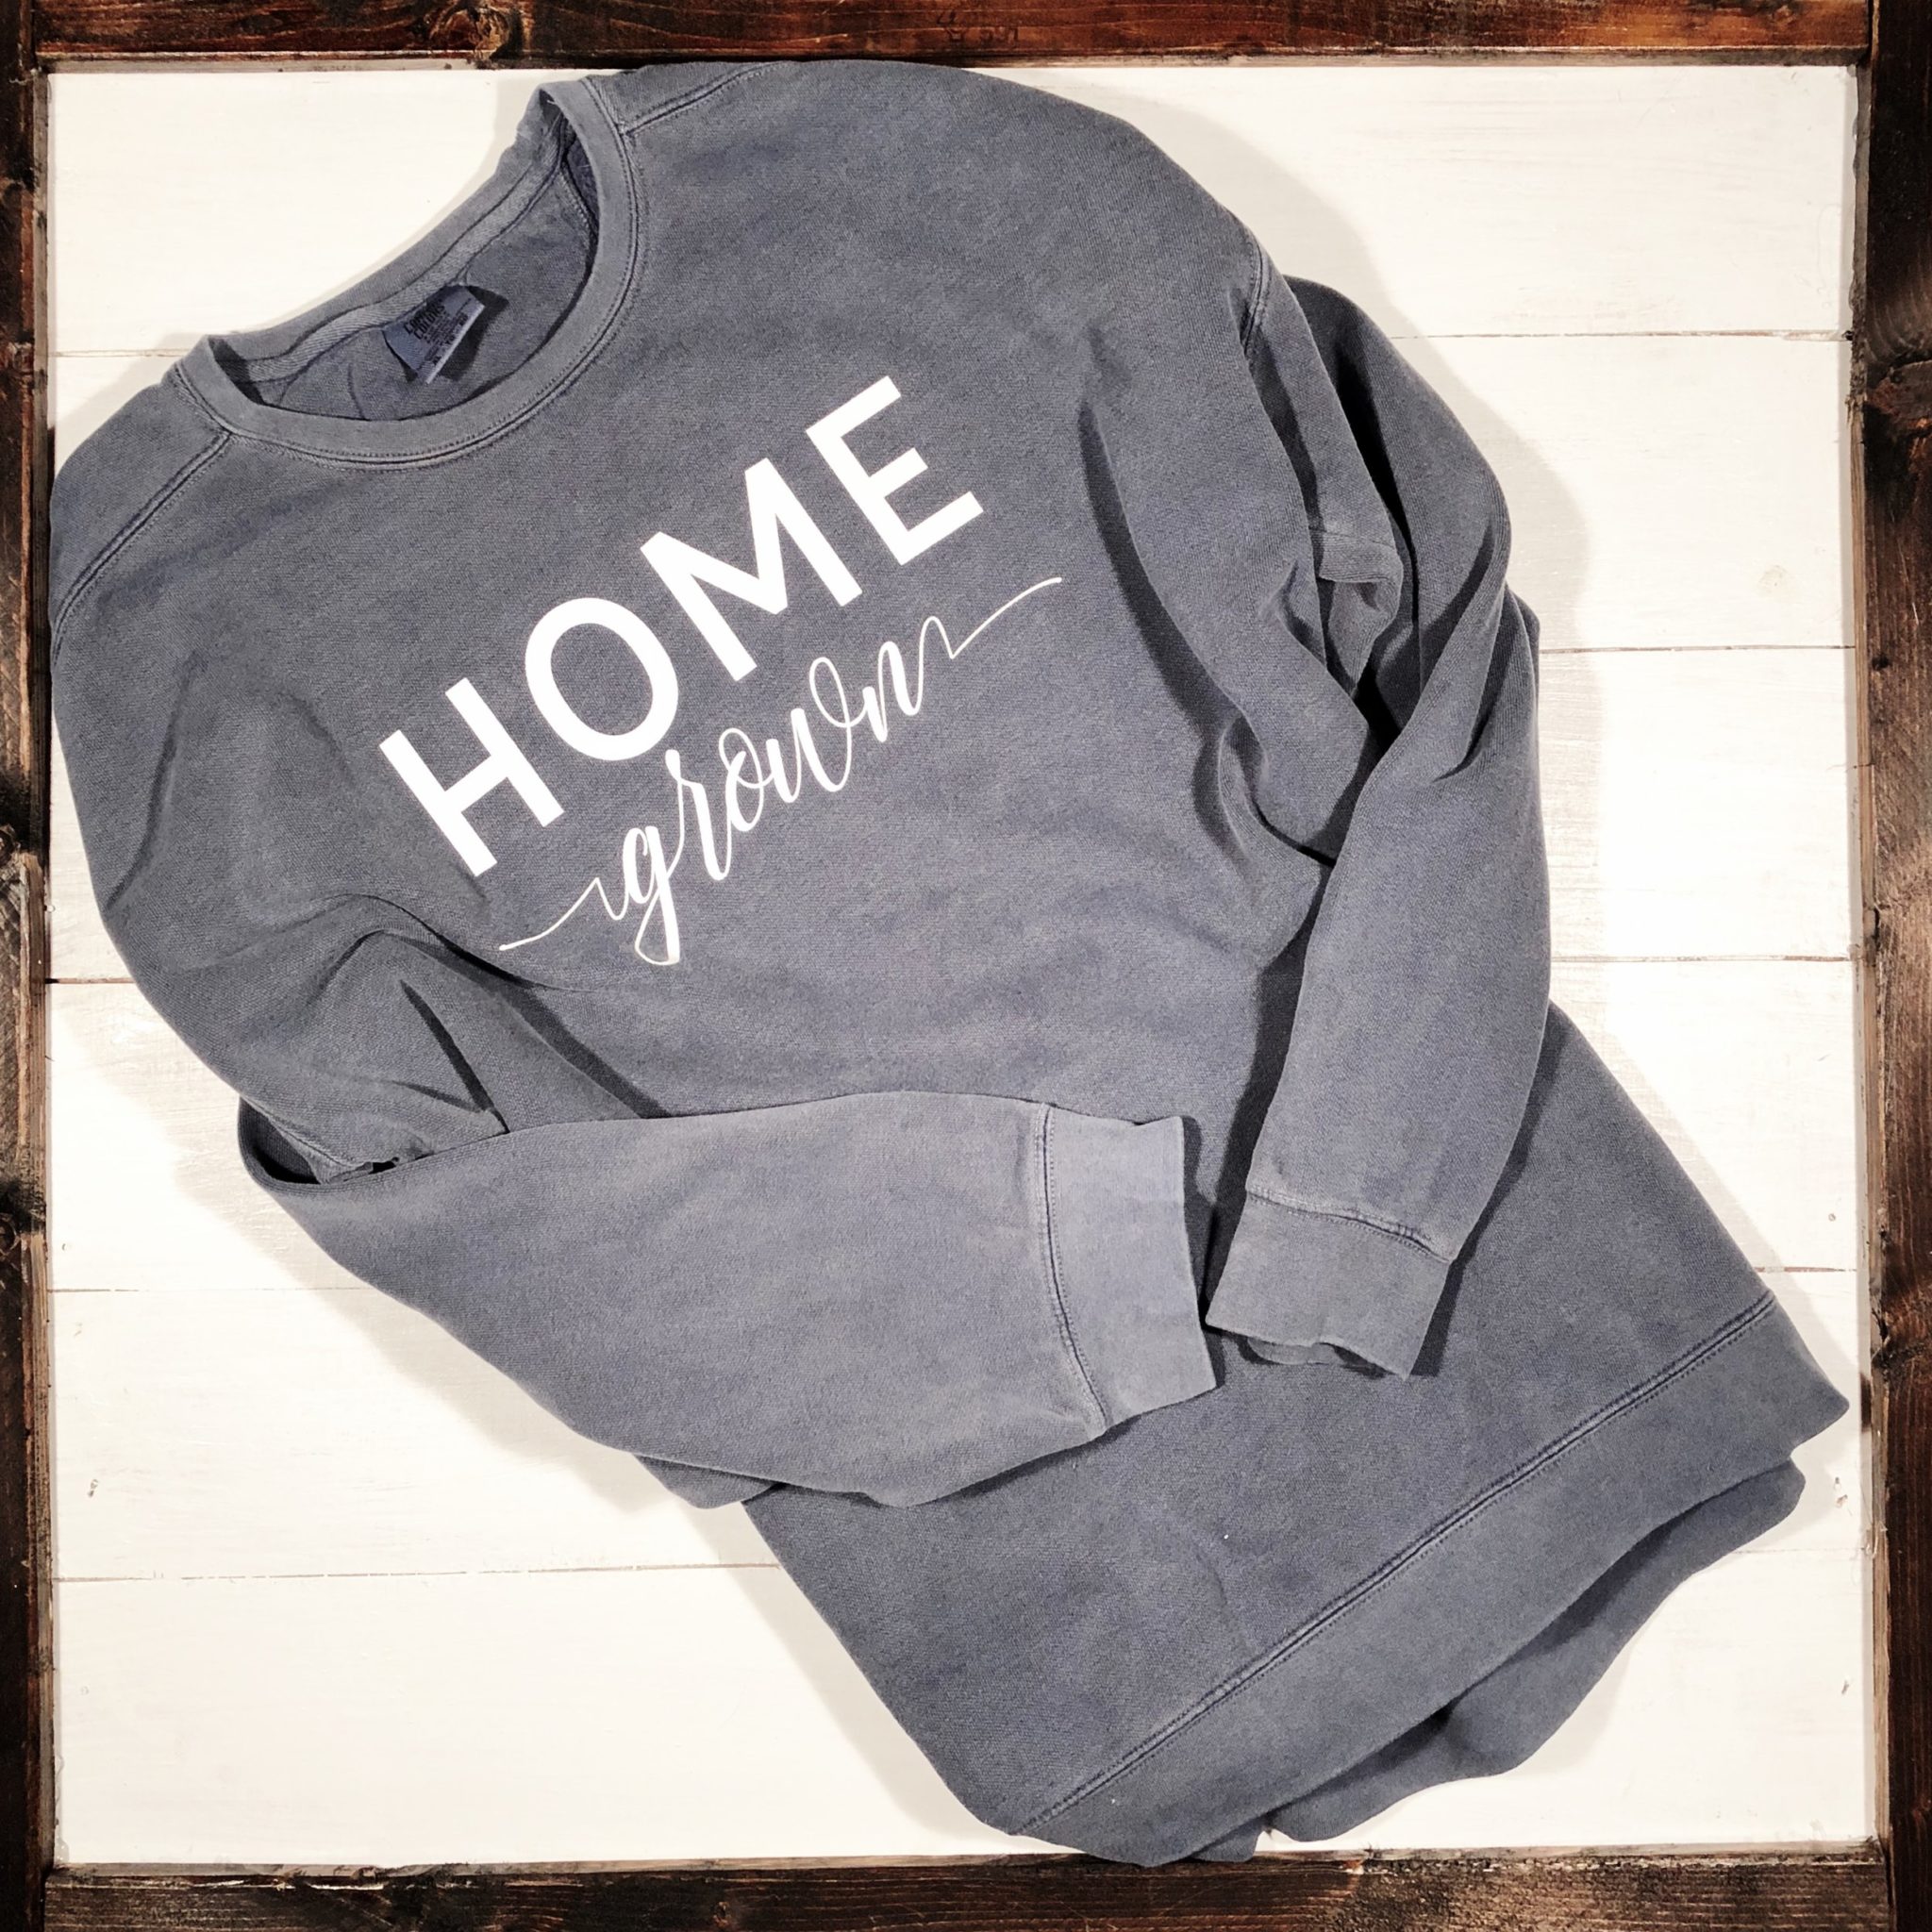 SOLD OUT "Home Grown" Sweatshirt (Comfort Color)